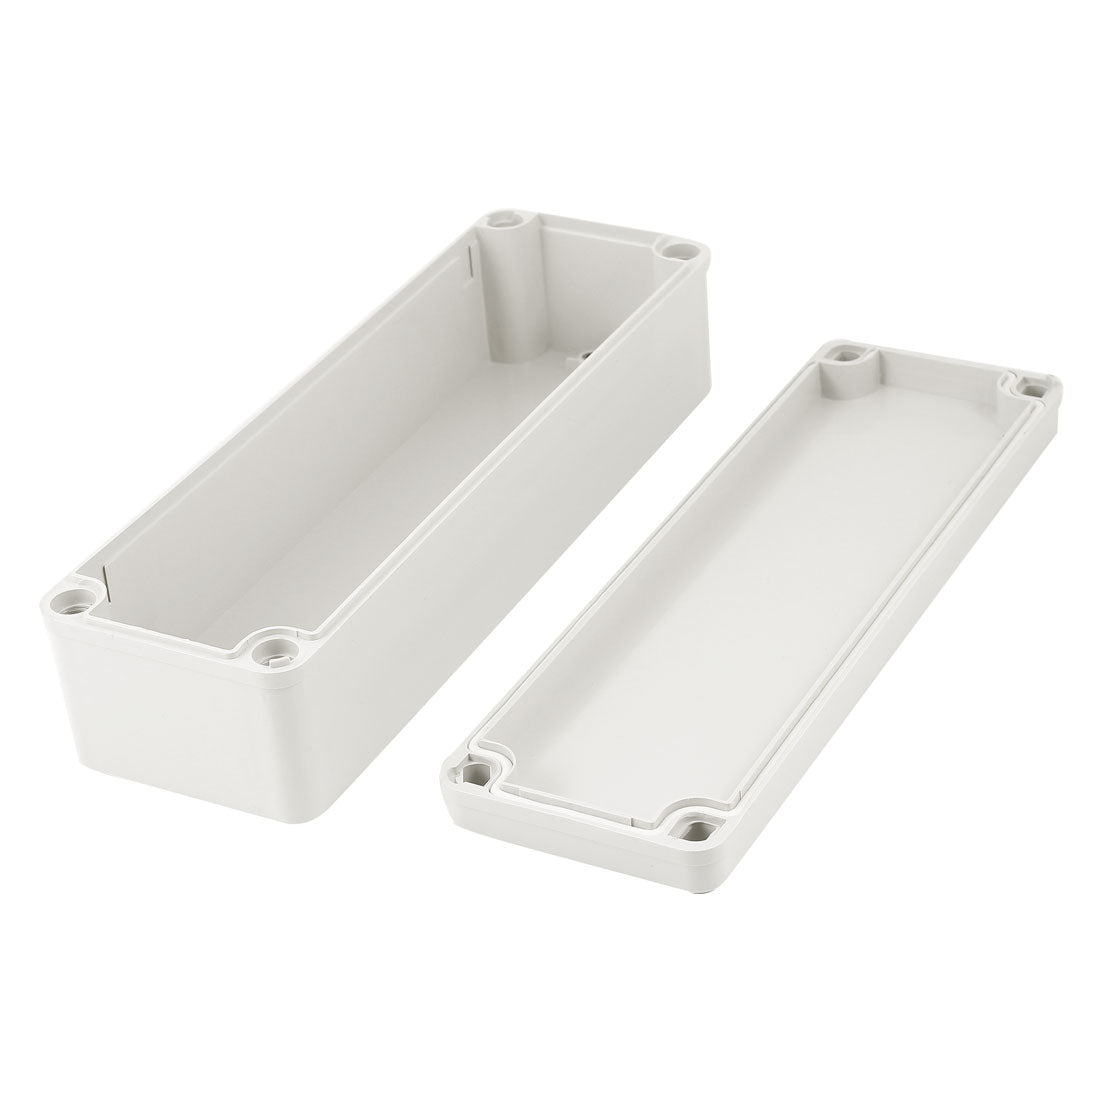 uxcell Uxcell 250mm x 78mm x 70mm Plastic Enclosure Case DIY Junction Box